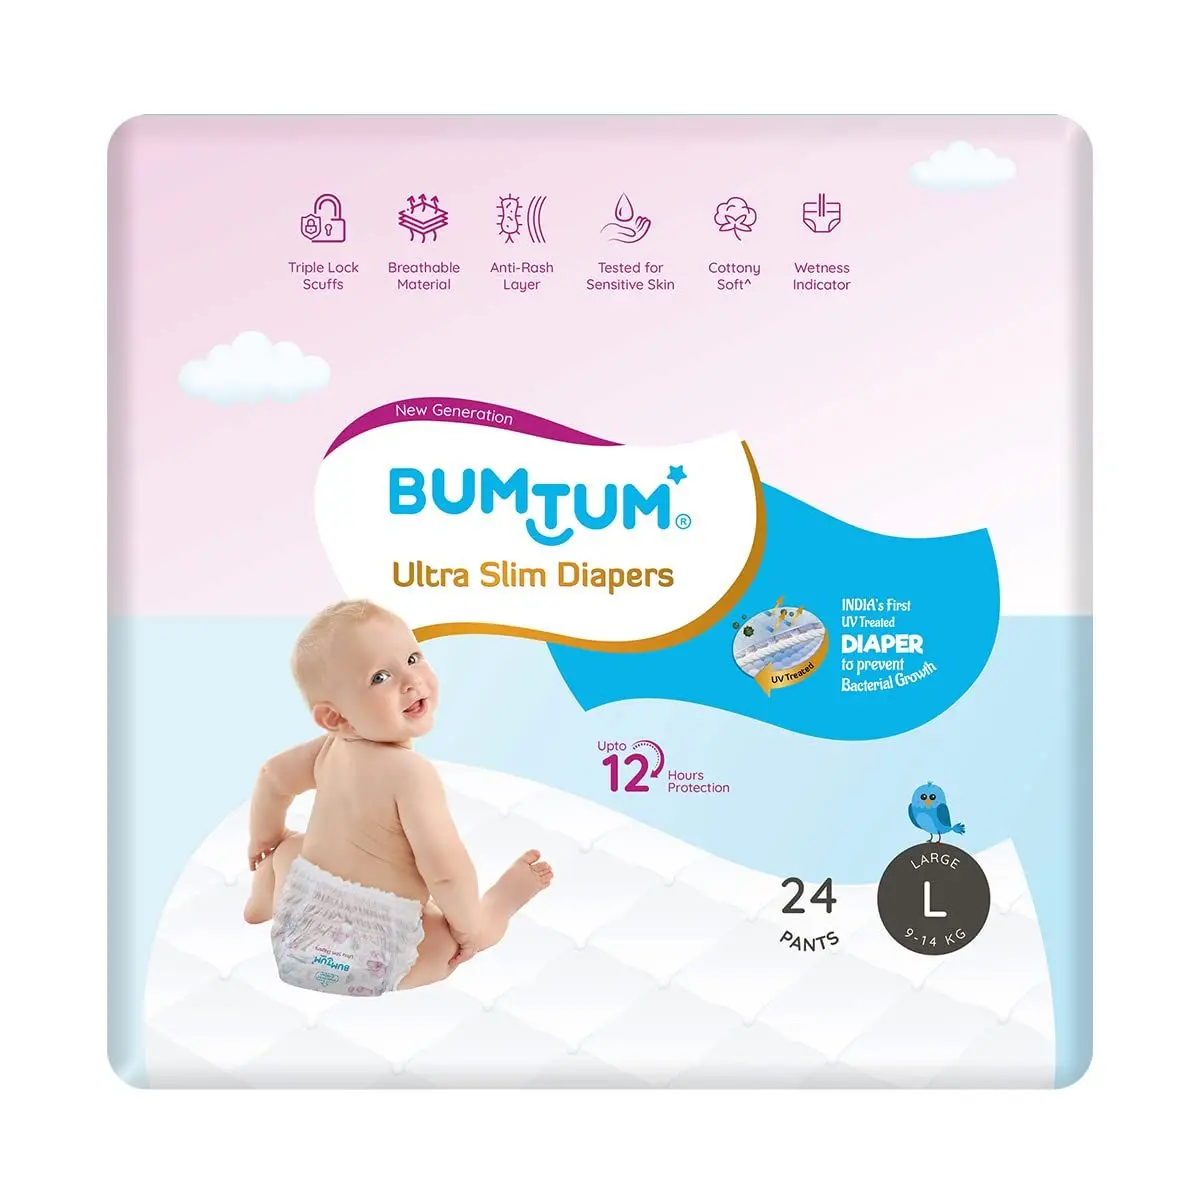 Bumtum Ultra Slim Baby Diaper Pants with Leakage Protection -9 to 14 Kg (Large, 24 Count, Pack of 1)